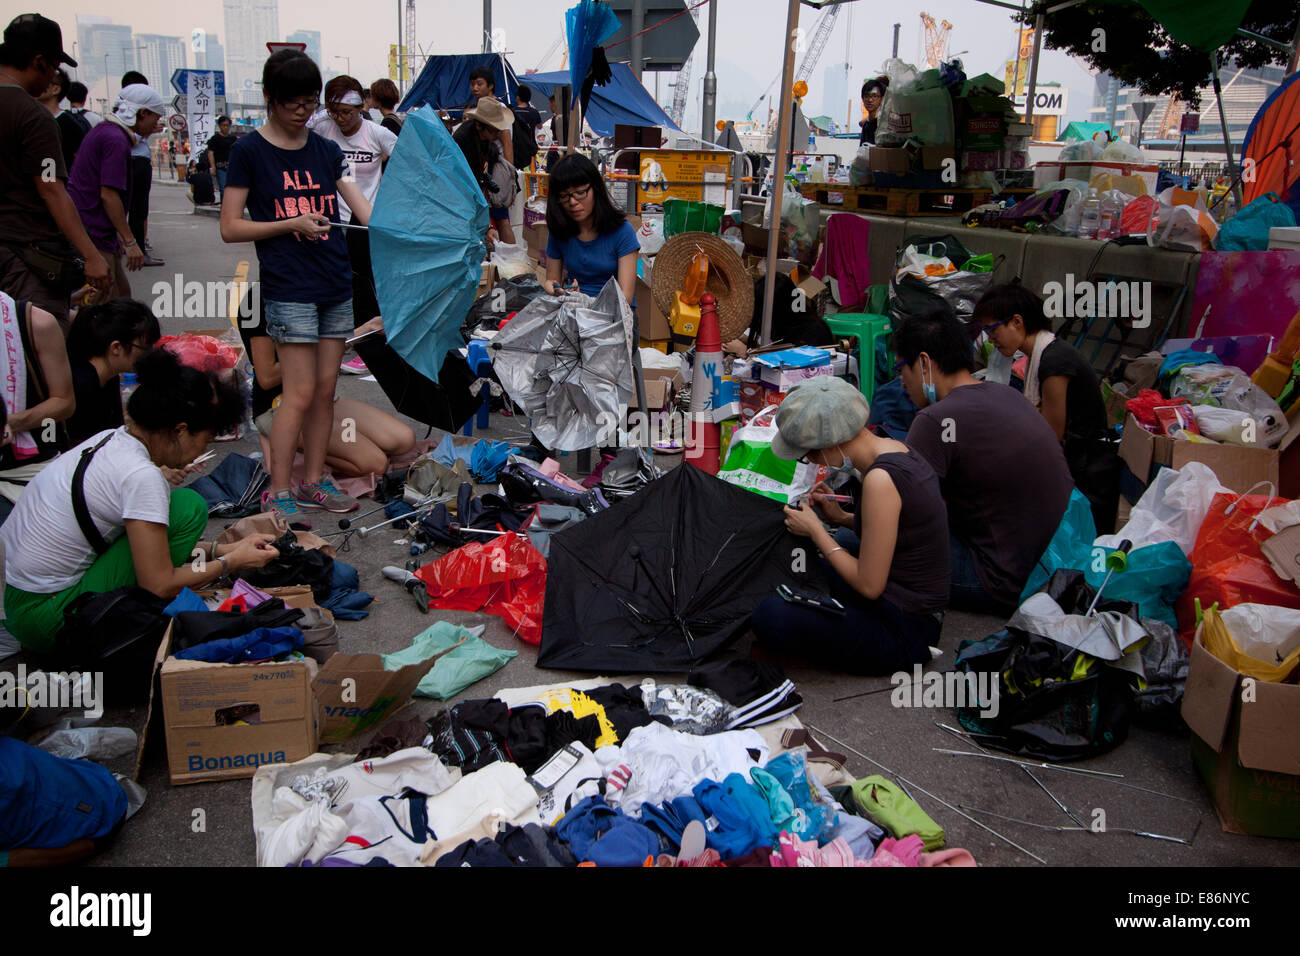 Hong Kong. 30th September, 2014. Umbrellas being repaired.  Protests against decision by Beijing to offer Hong Kong voters, choice of candidates for Chief Executive in 2017 elections from approved list of candidates, rather than an open list. Credit:  SCWLee/Alamy Live News Stock Photo